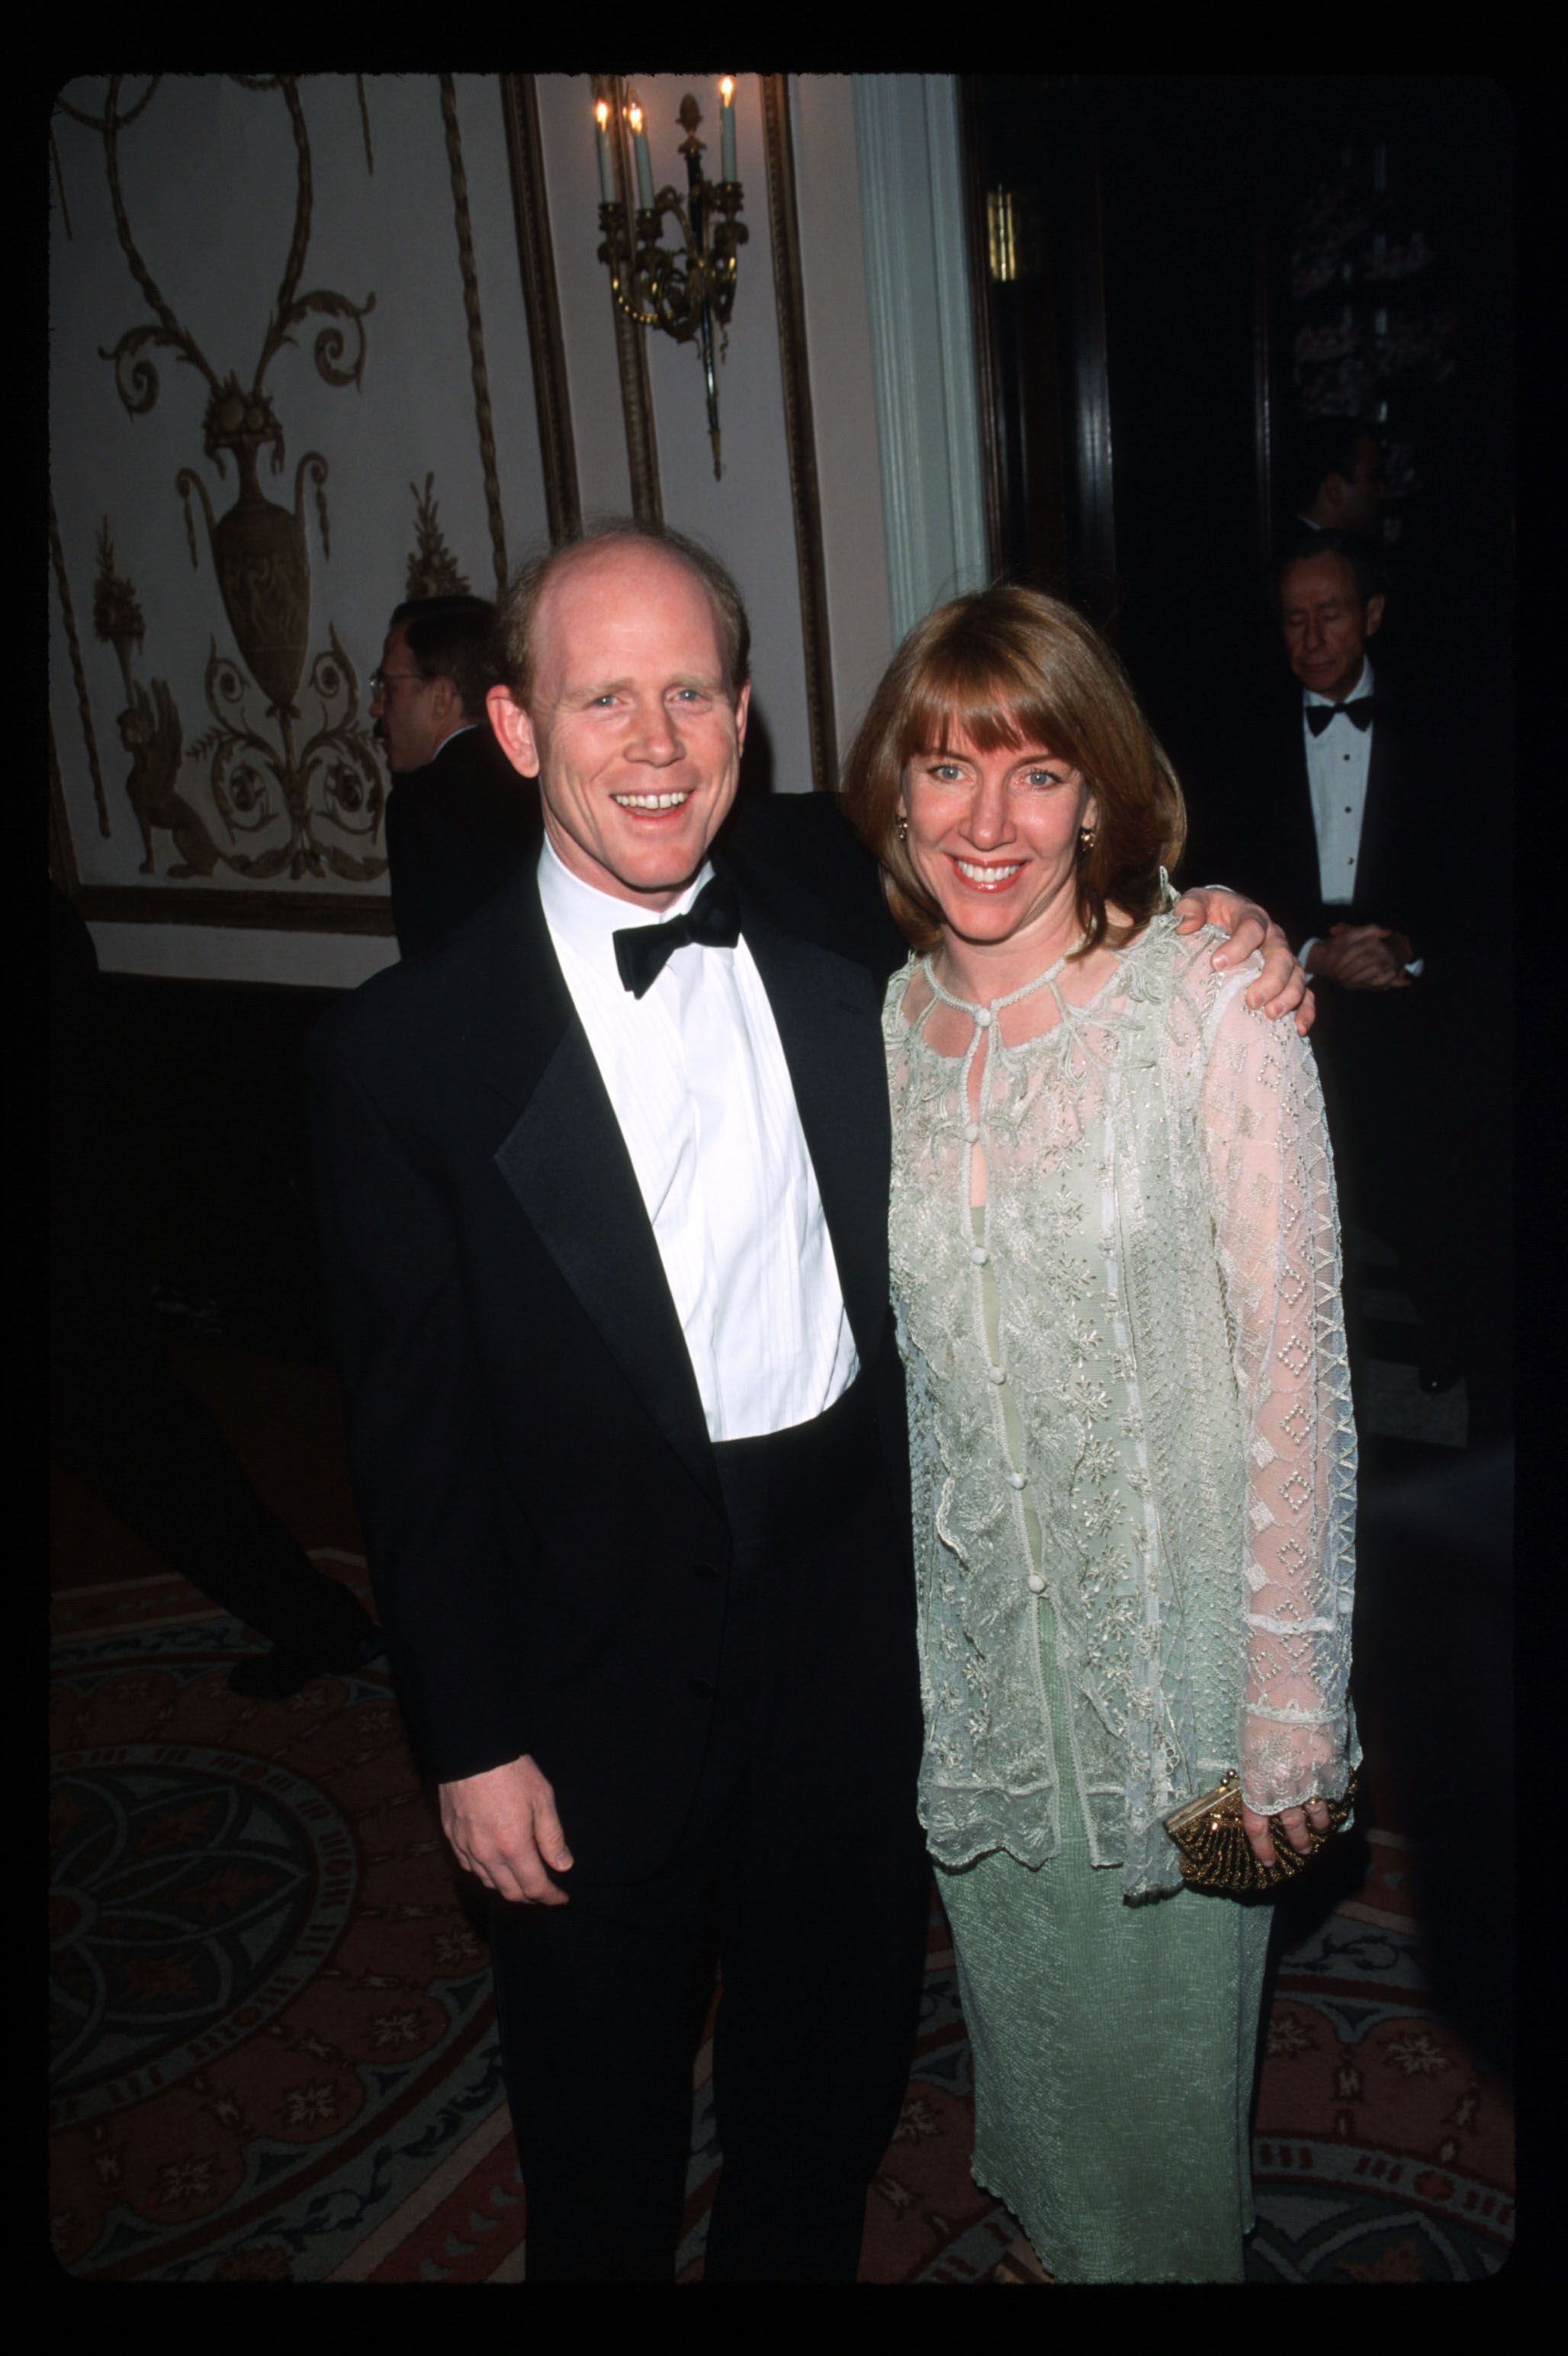 Ron Howard with his wife Cheryl on April 29, 1999, at the 14th Annual American Museum of the Moving Image Tribute in New York City | Photo: Evan Agostini/Liaison/Getty Images